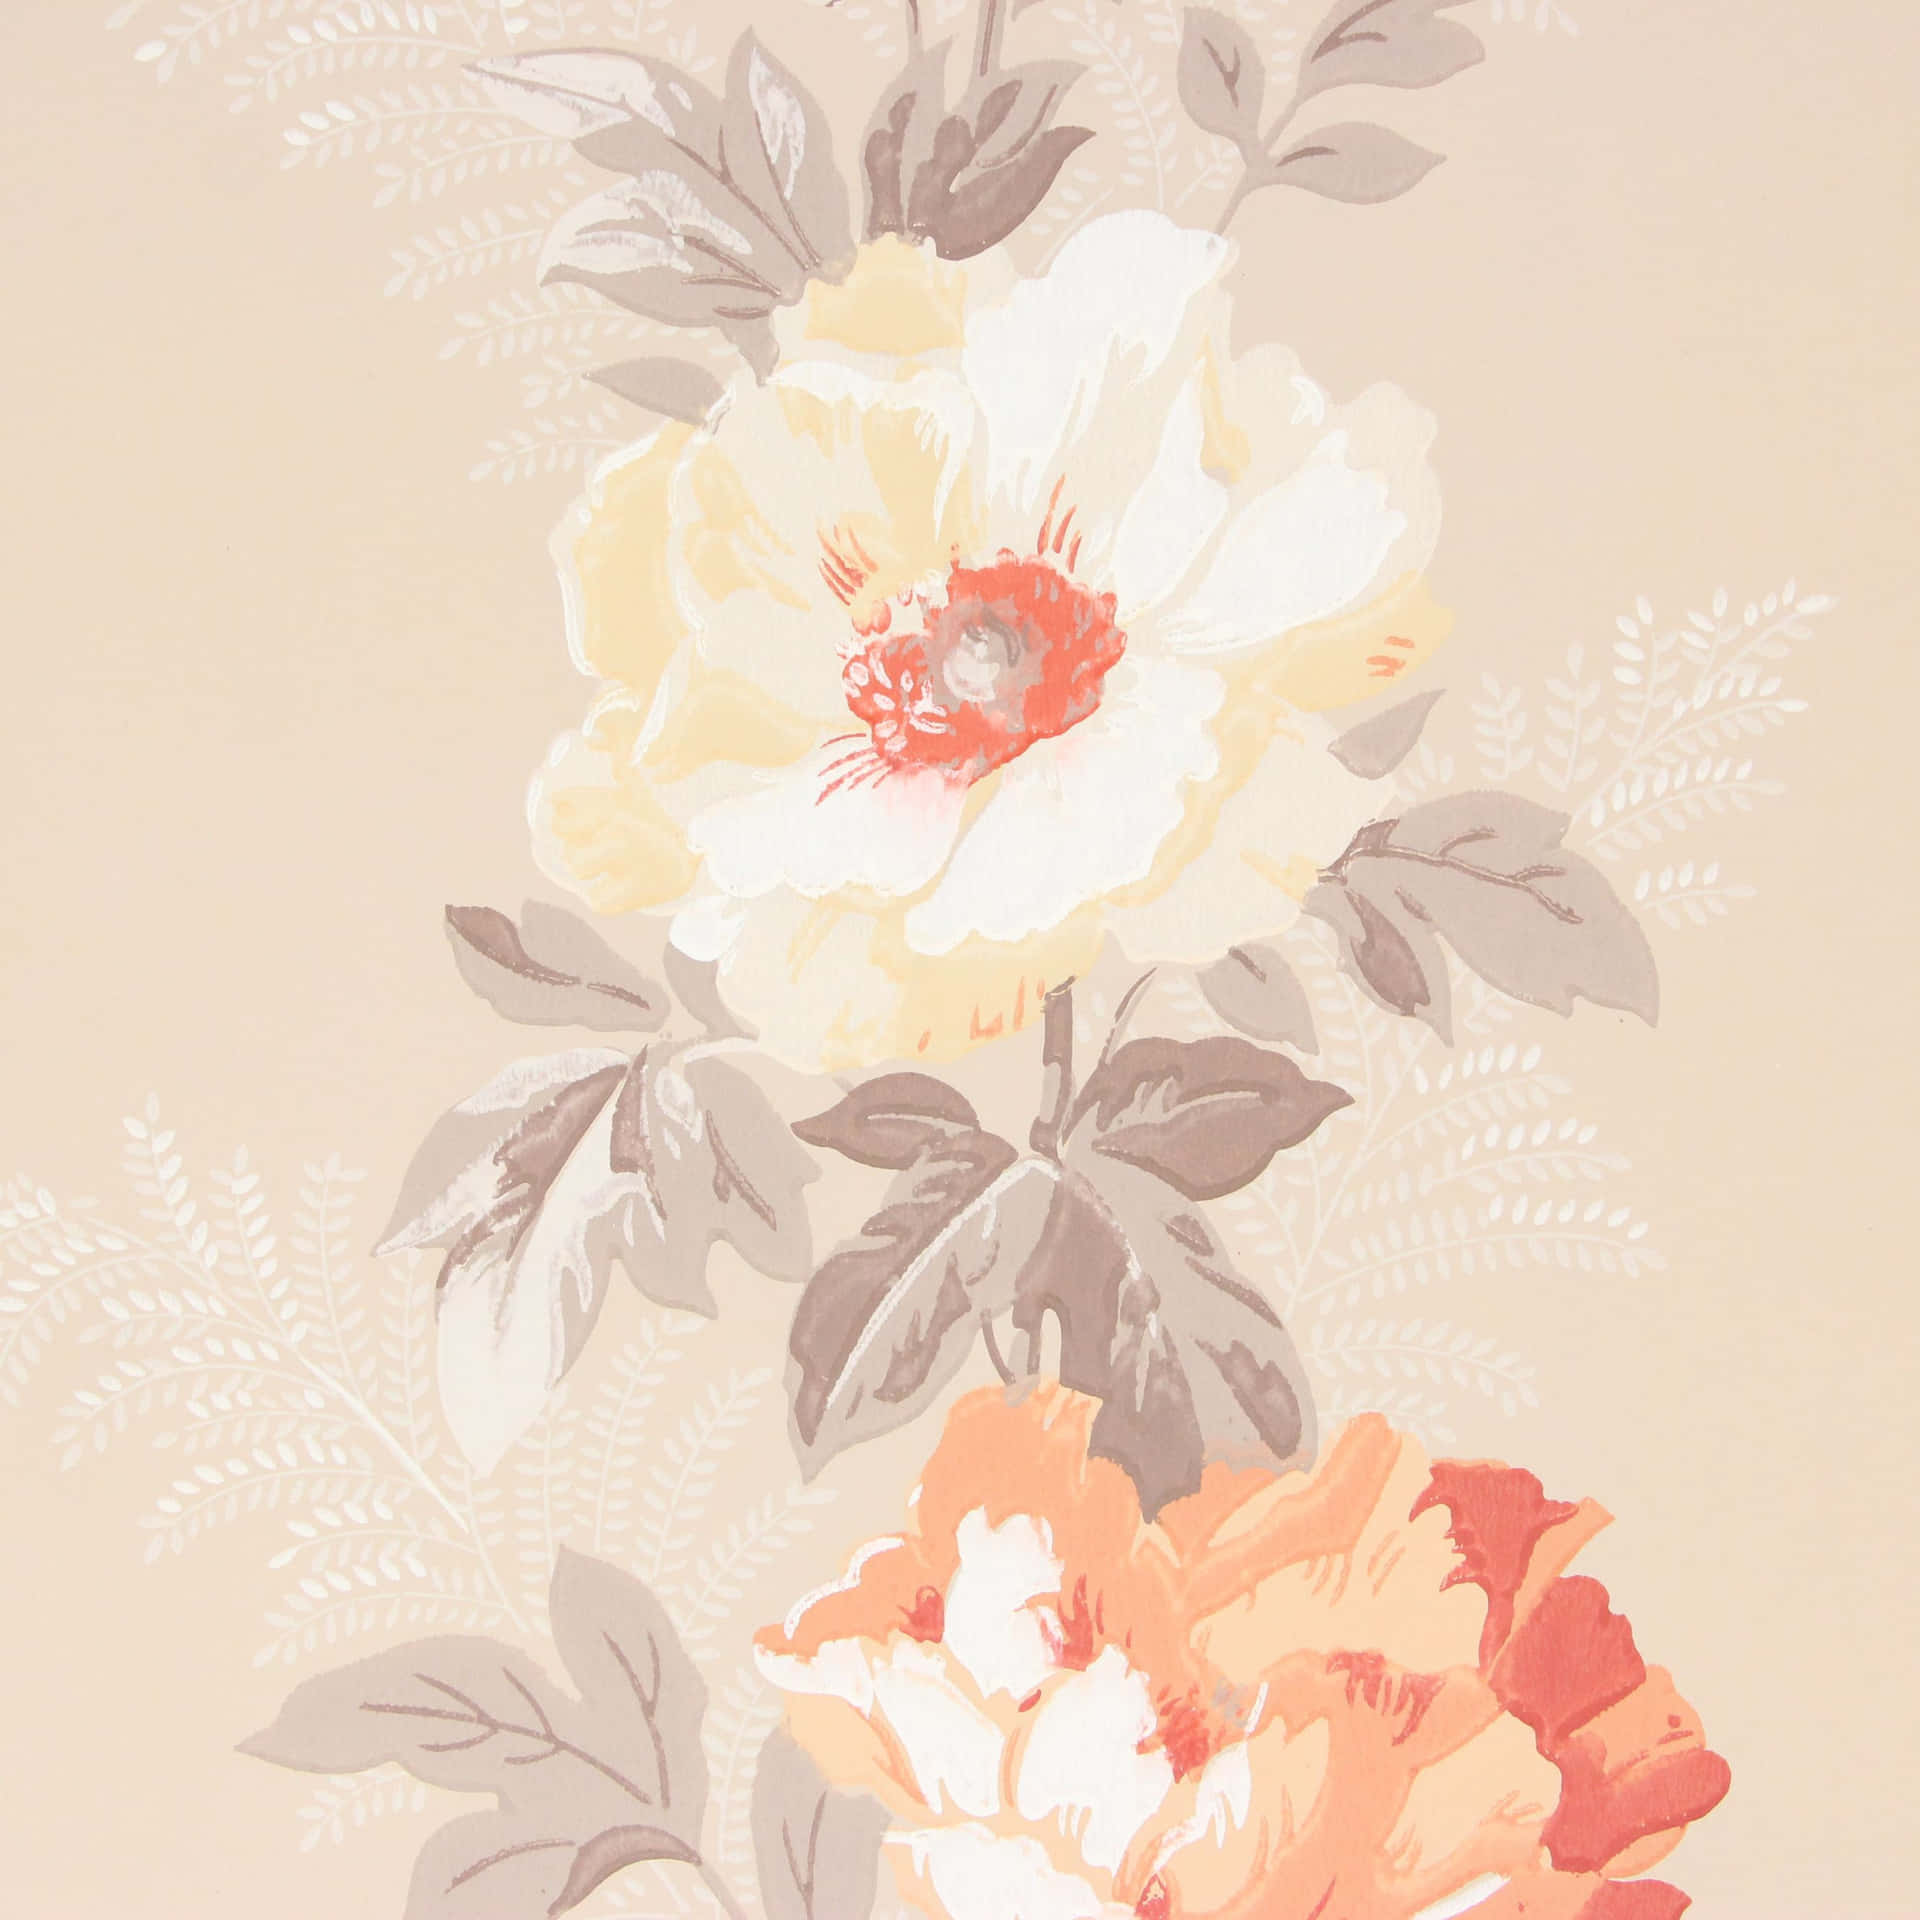 A vibrant color palette of peaches and oranges, with subtle hints of pink, red and purple. Wallpaper